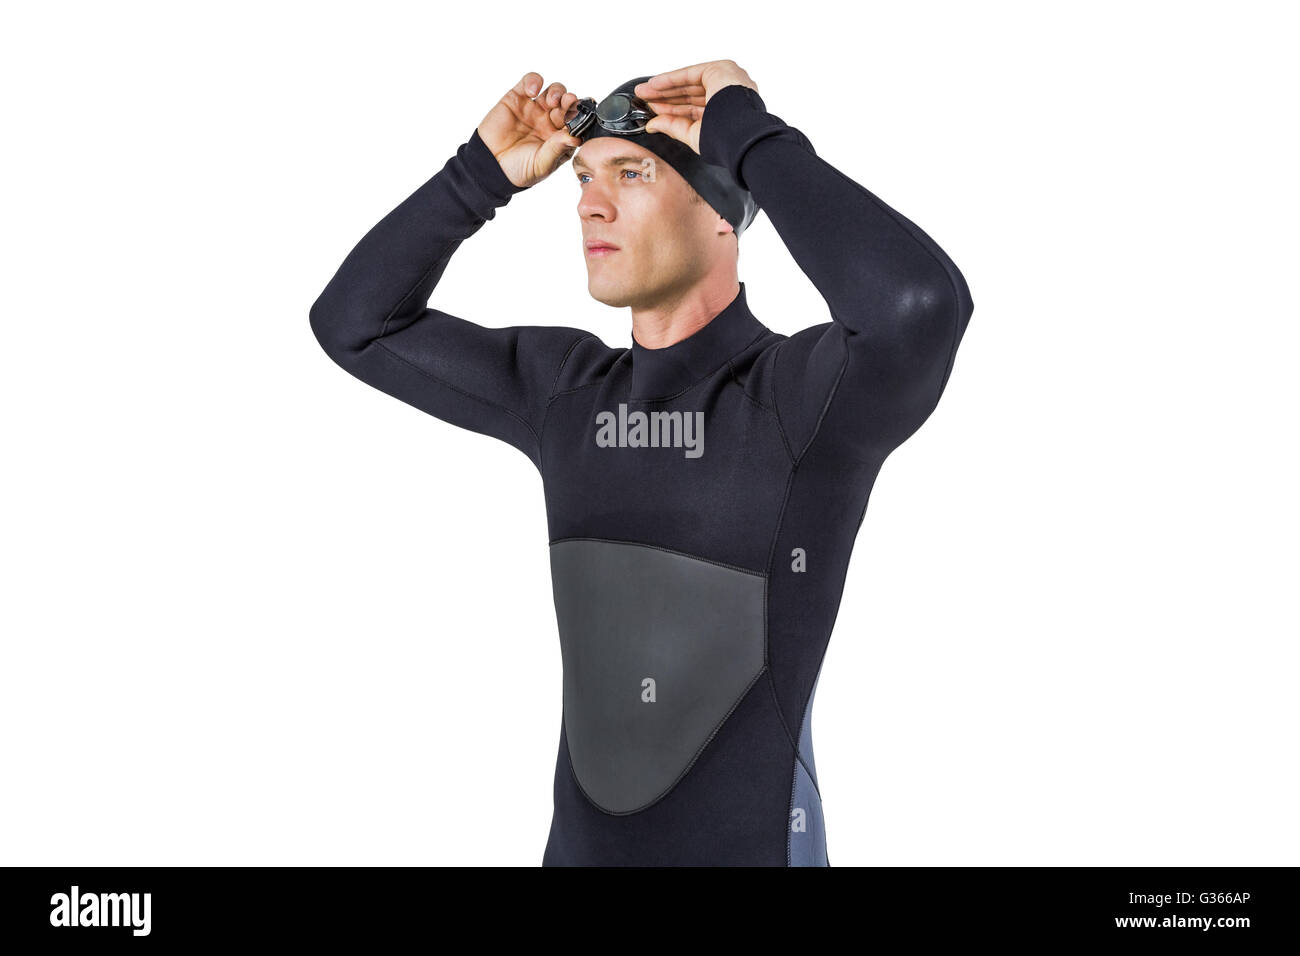 Swimmer in wetsuit wearing swimming goggles Stock Photo